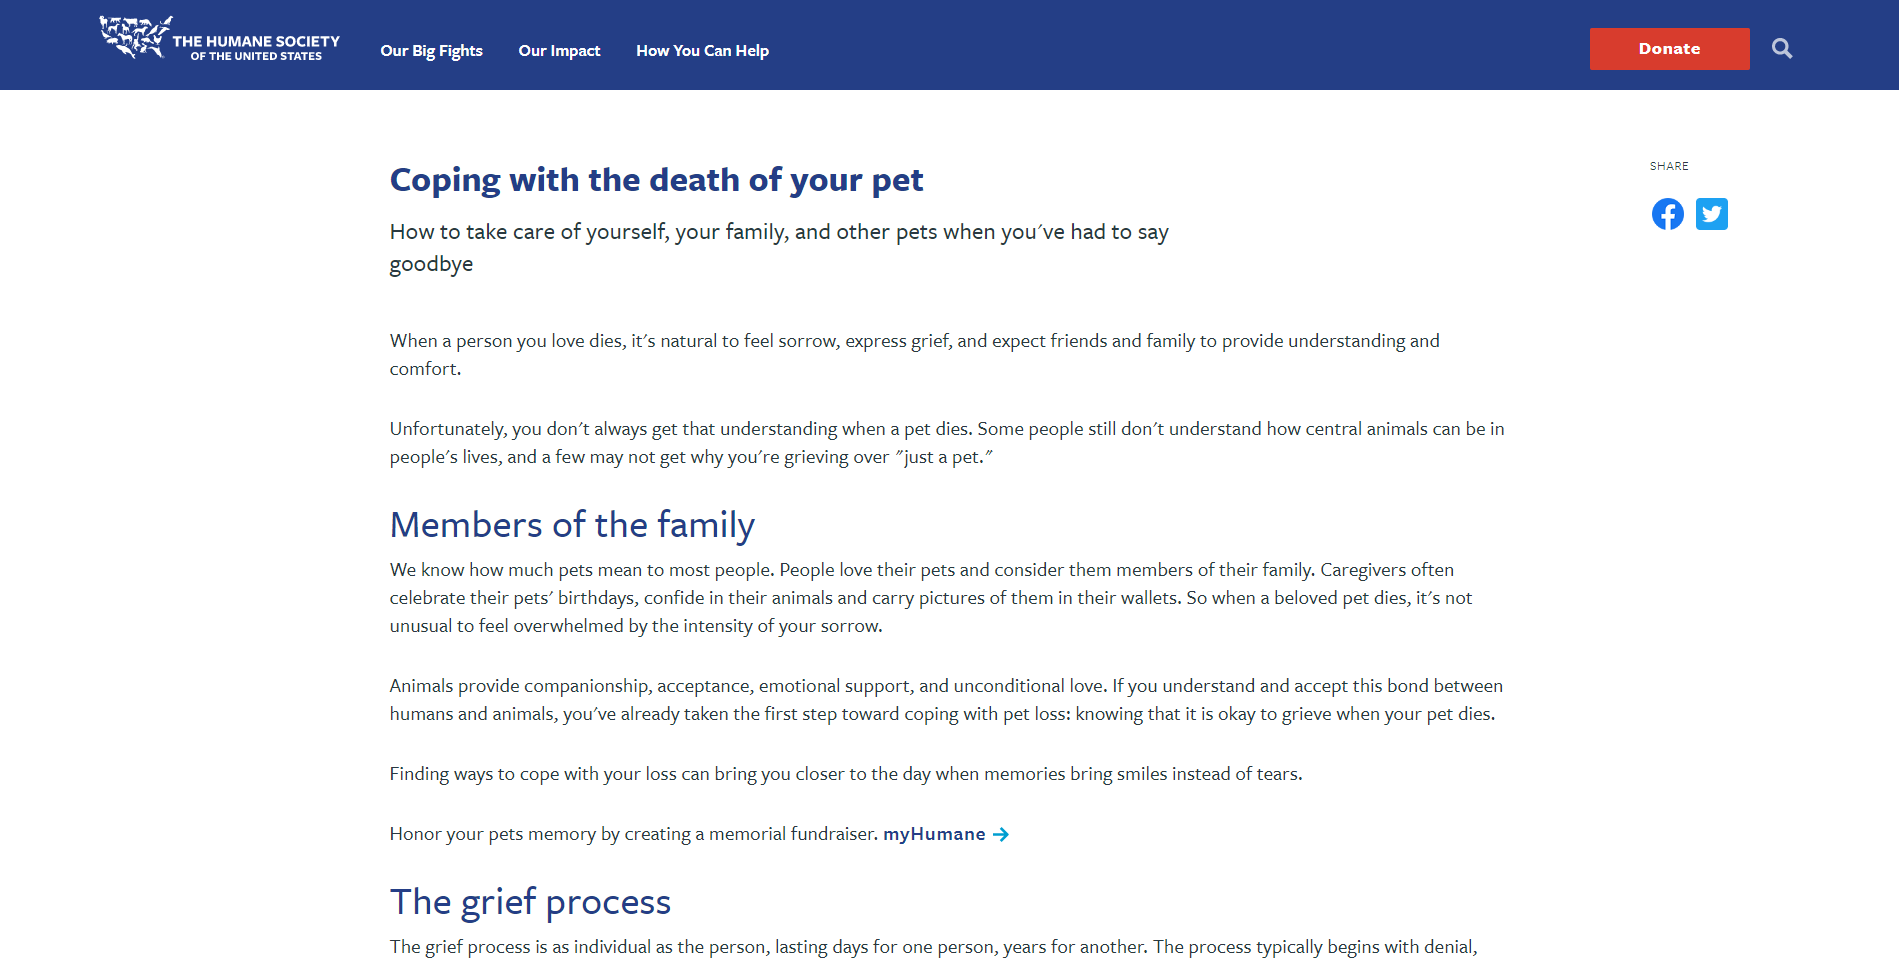 Coping with the death of your pet